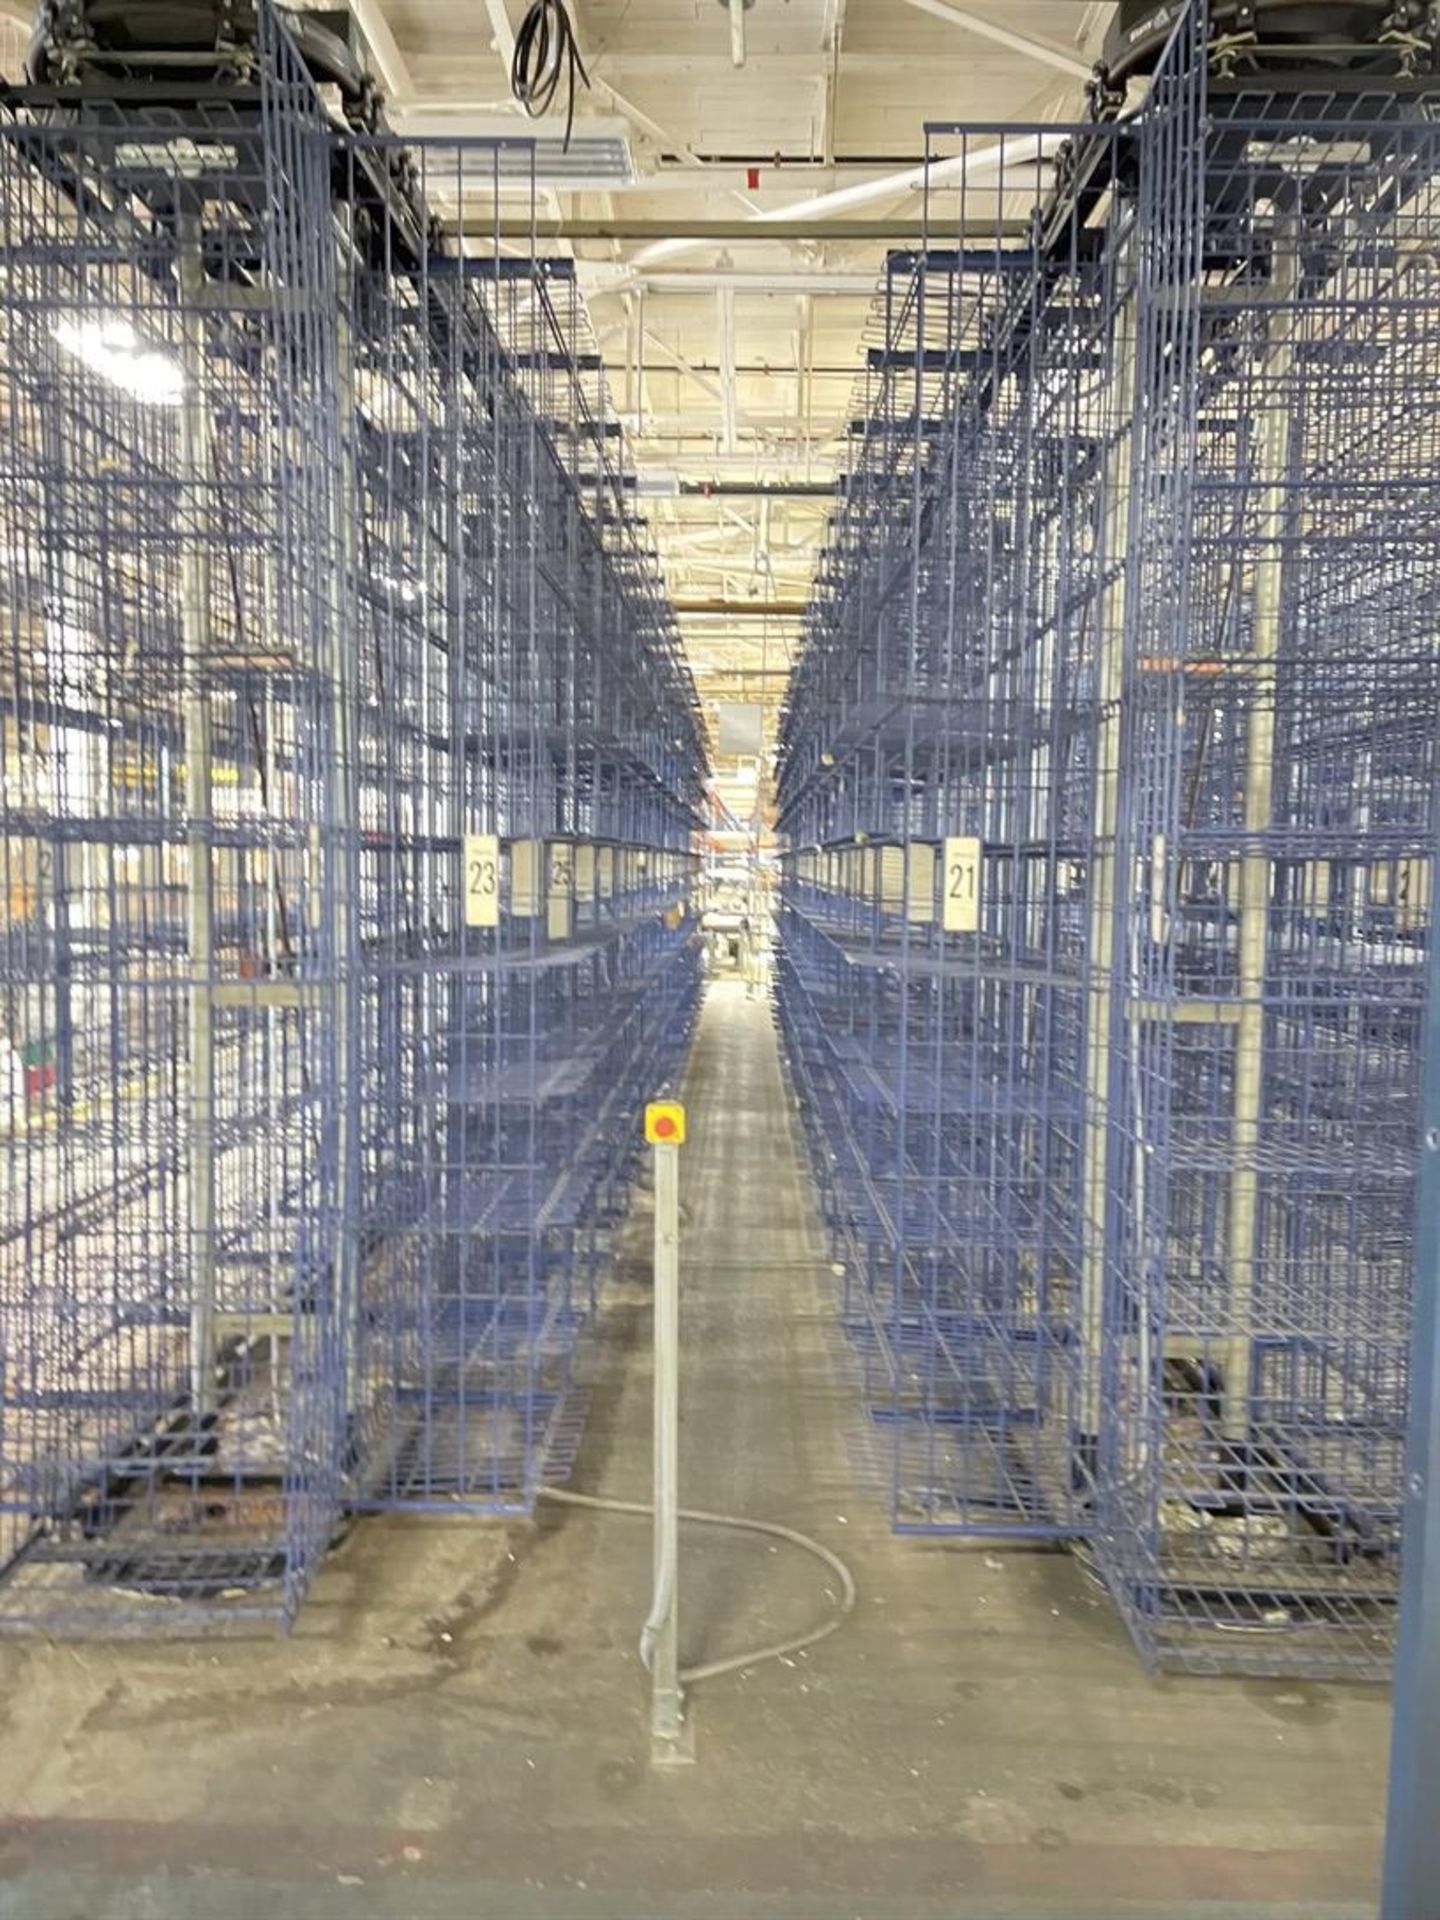 WHITE 5-Carousel Inventory Storage System, 42 Sections of 10 Baskets Each, 420 Baskets Per Carousel, - Image 3 of 6